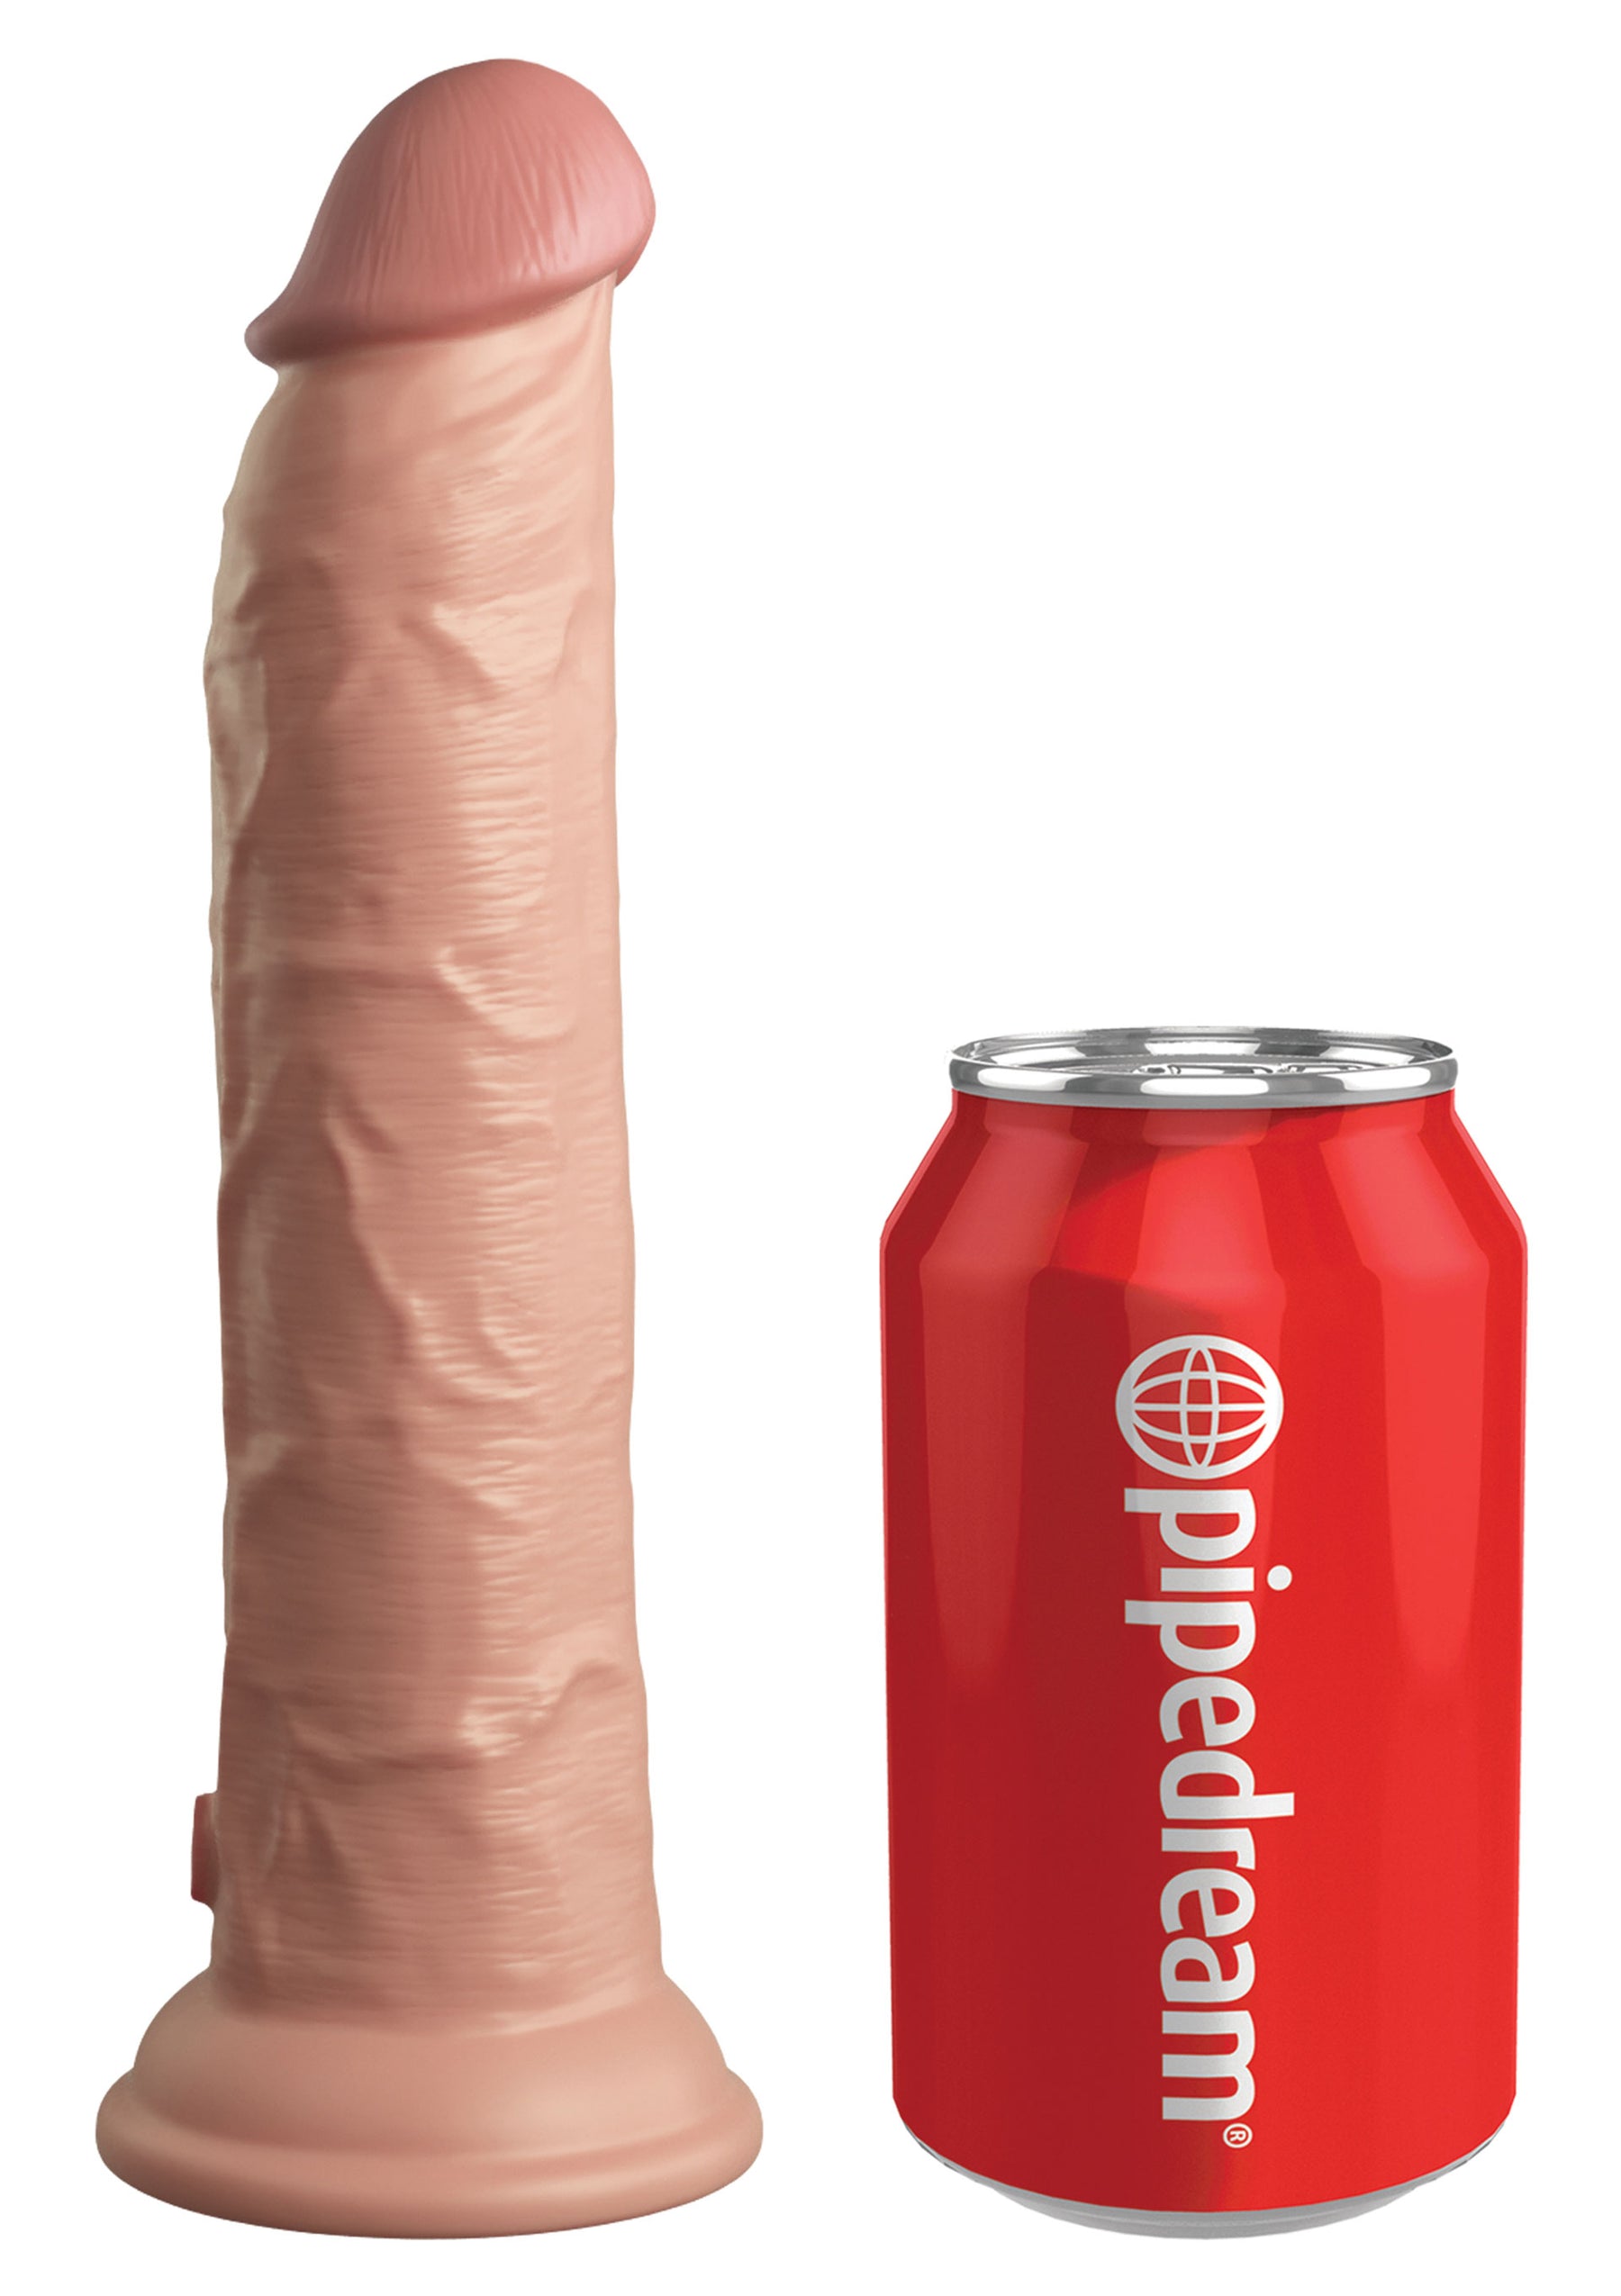 9 Inch 2Density Silicone Cock